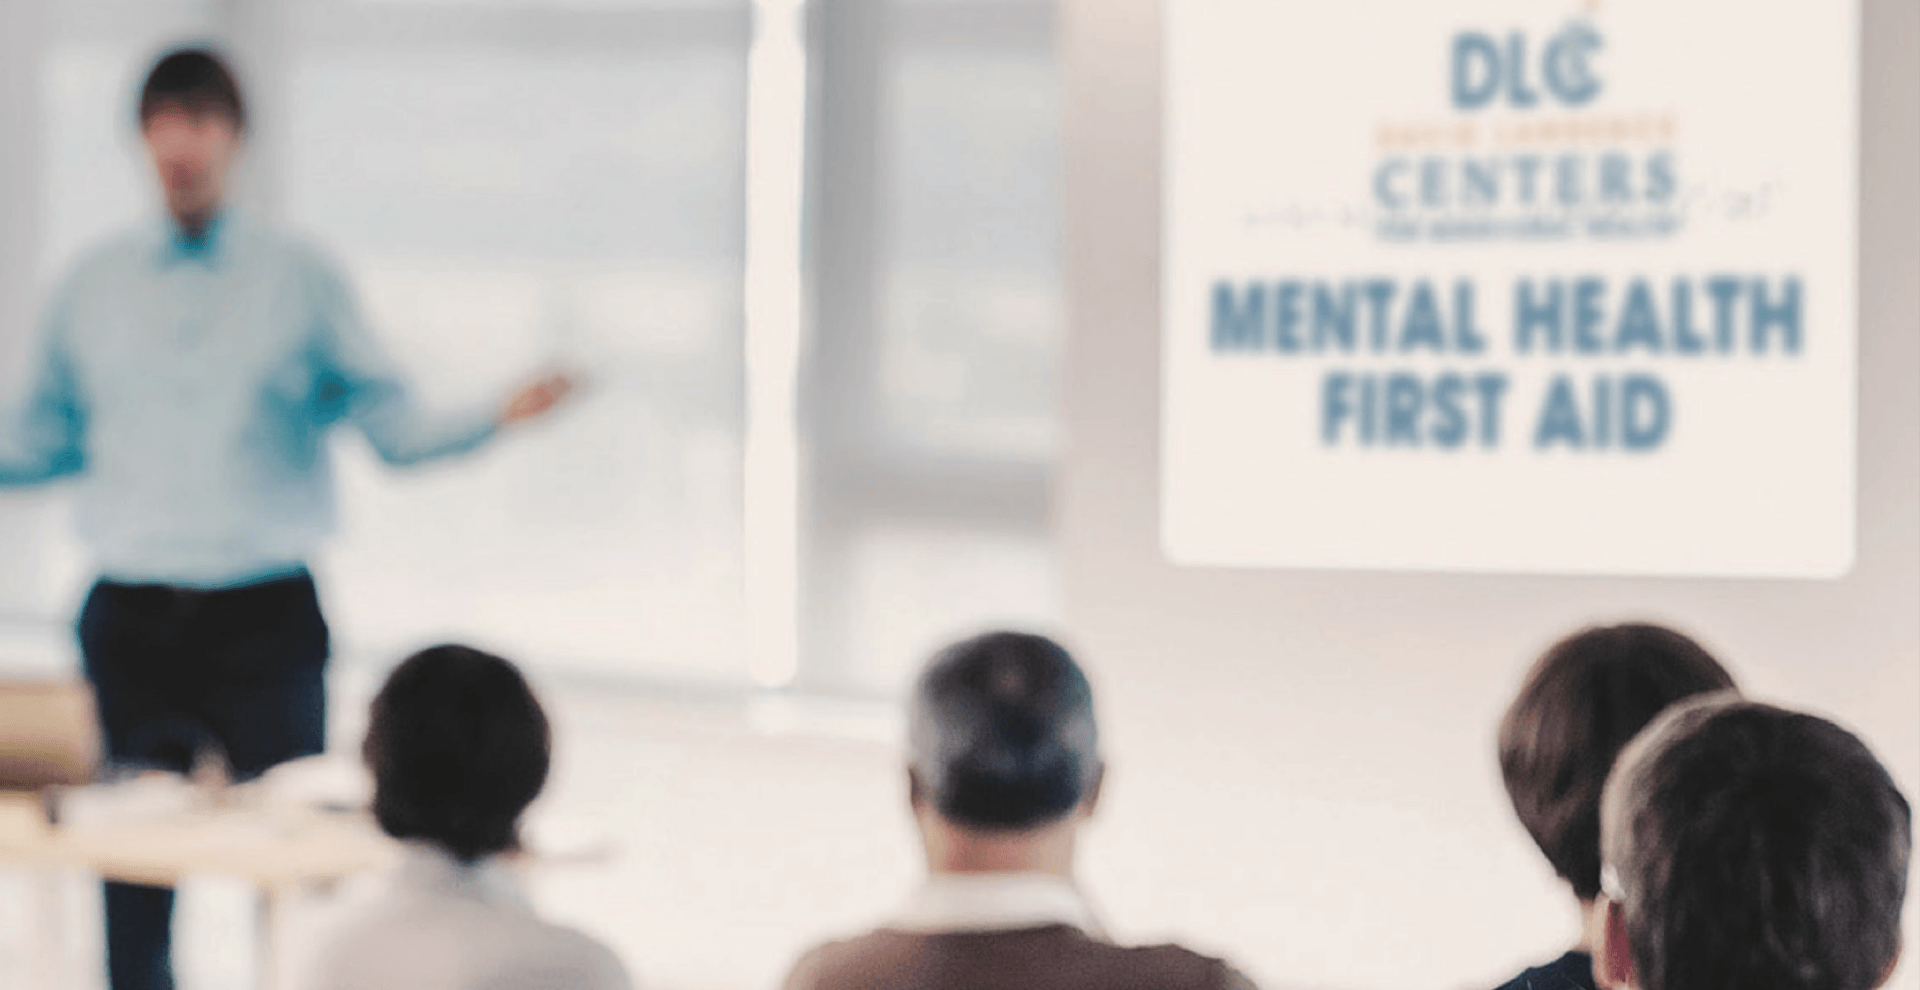 September 9 Adult Mental Health First Aid Training (In-Person Instructor-Led Session)